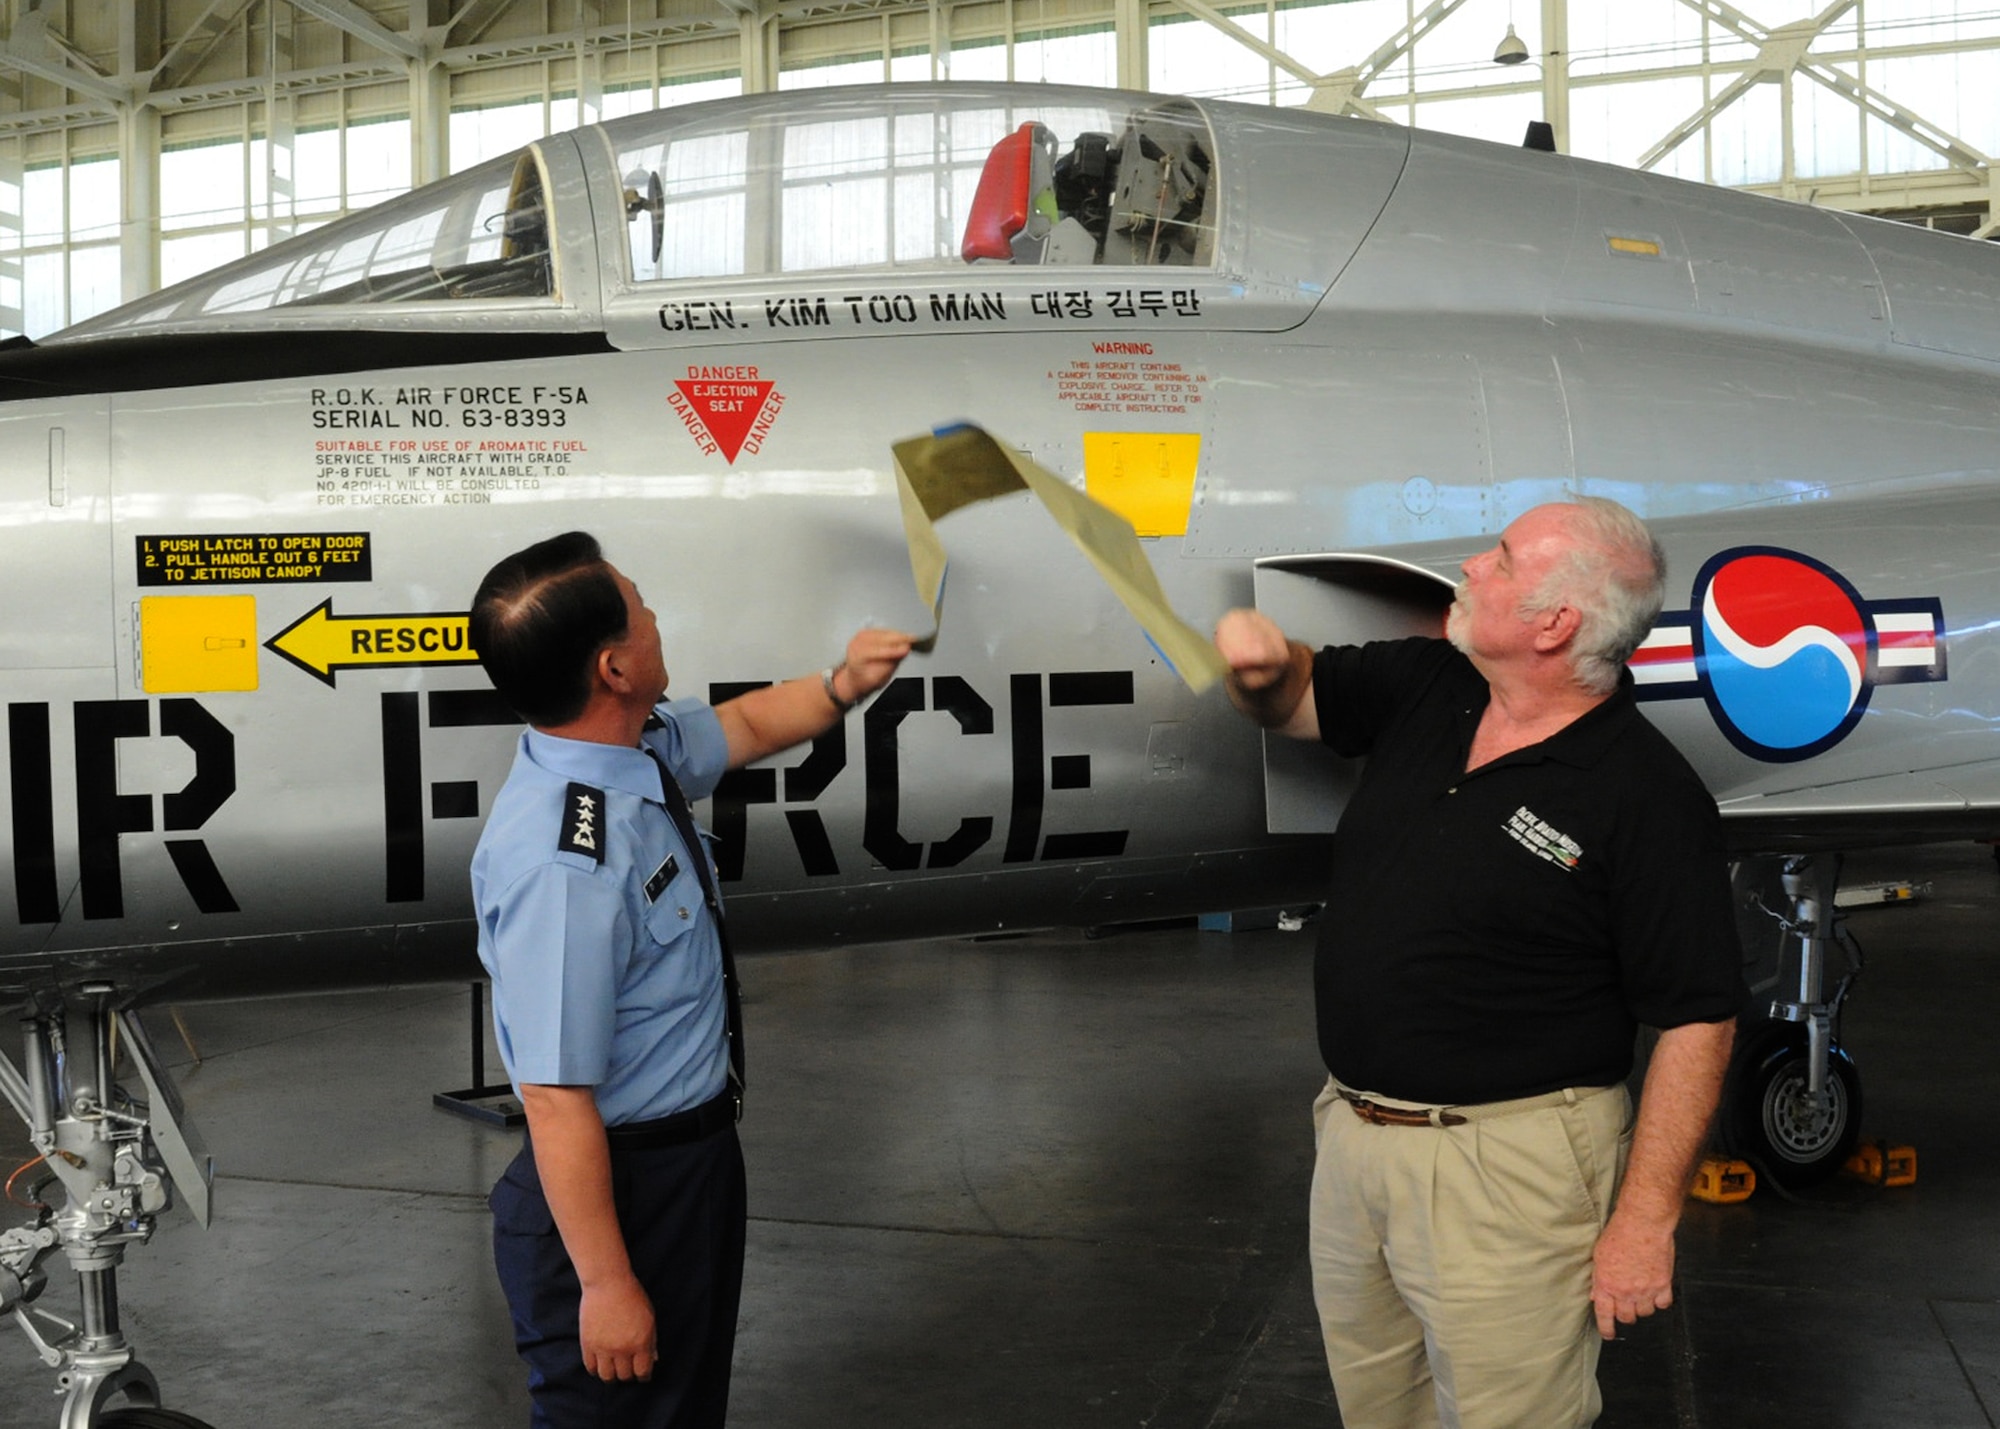 Lt. Gen. Cha-Kyu Choi, Republic of Korea, Air Force Vice Chief of Staff, and Burl Burlingame, Pacific Aviation Museum, curator, unveil a ROKAF F-5A Freedom Fighter dedicated to Gen. Kim Too Man, a legendary figure in the ROKAF, at Pacific Aviation Museum, Ford Island, Hawaii, Nov. 12, 2012.  The aircraft joins the museum’s growing collection of more than 35 historic aircraft.  (U.S. Air Force photo/Tech Sgt. Jerome S. Tayborn/Released)